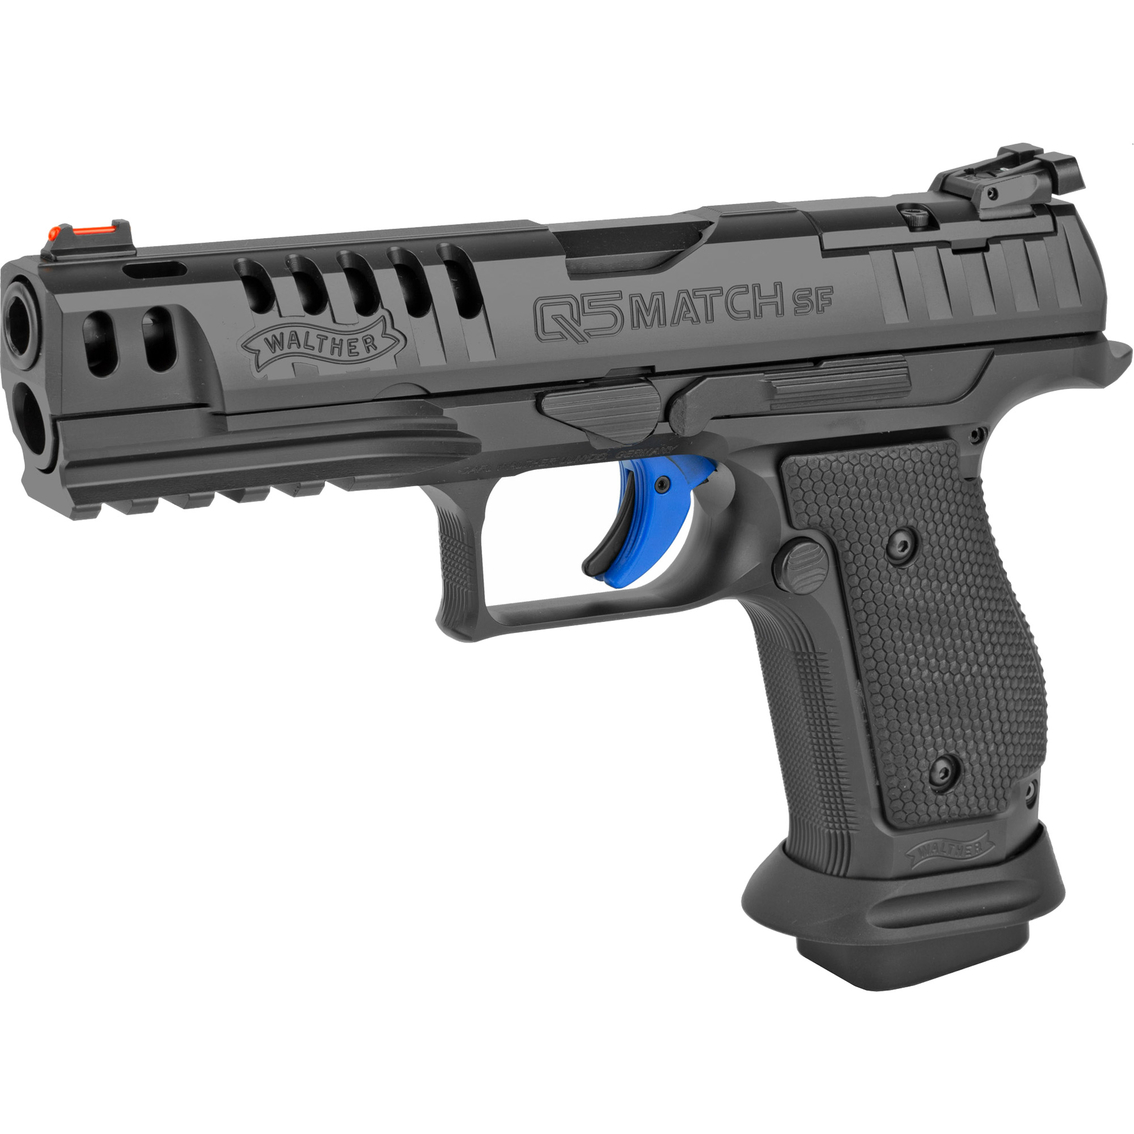 Walther PPQ Q5 Match Steel Frame Pro 9mm 5 in. Barrel Optic Ready 17 Rnd Pistol Blk - Image 3 of 3